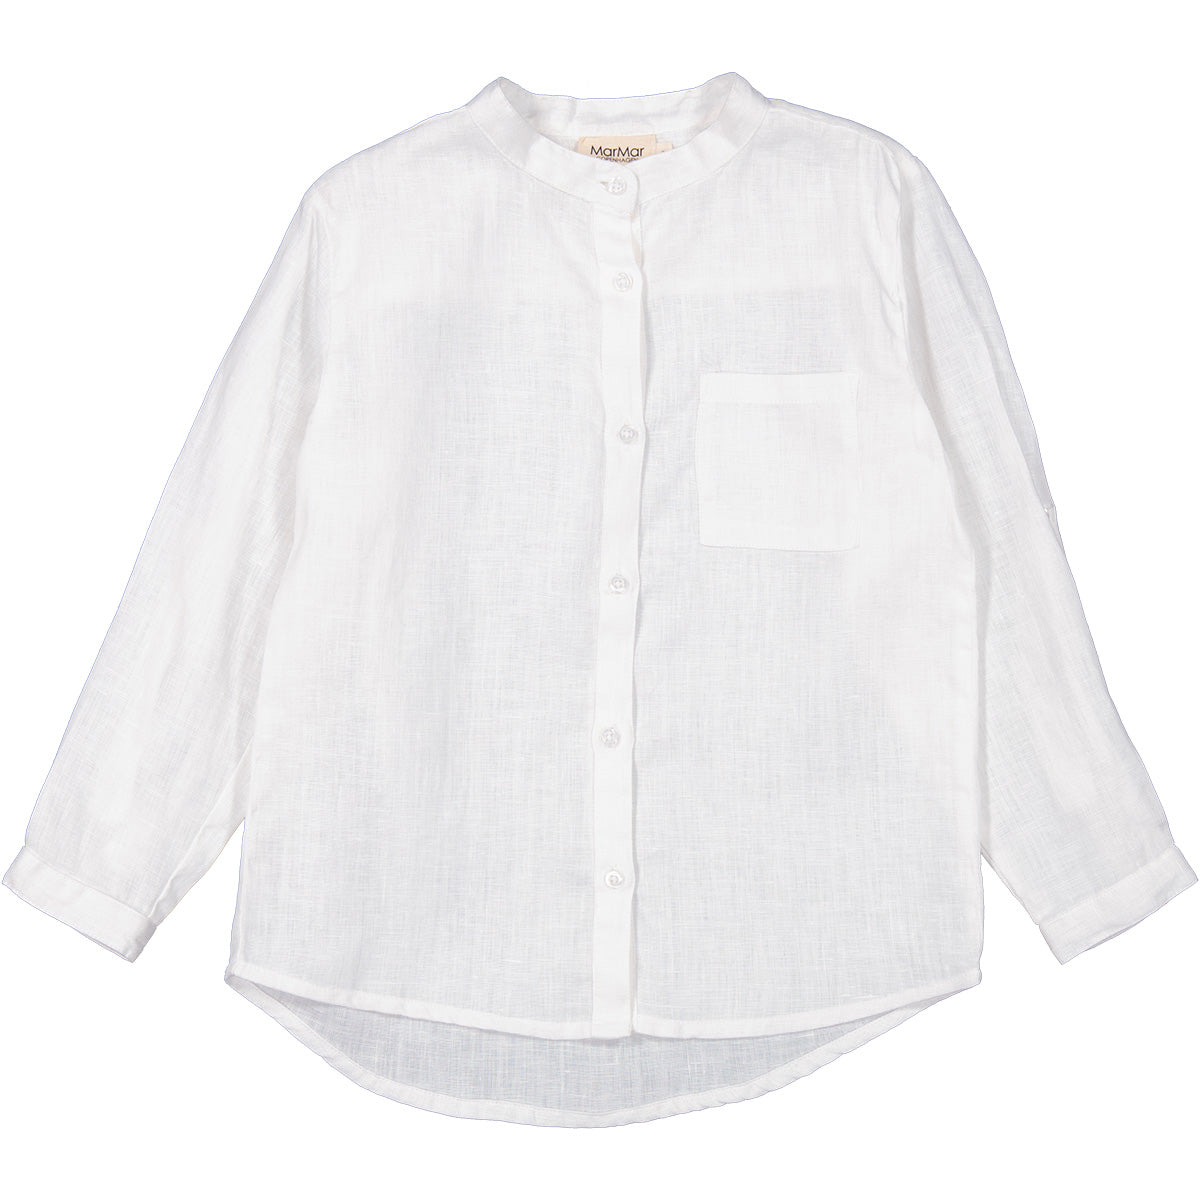 The Theodor Long Sleeve Shirt from MarMar Copenhagen. Lovely long sleeved mao shirt with button closure